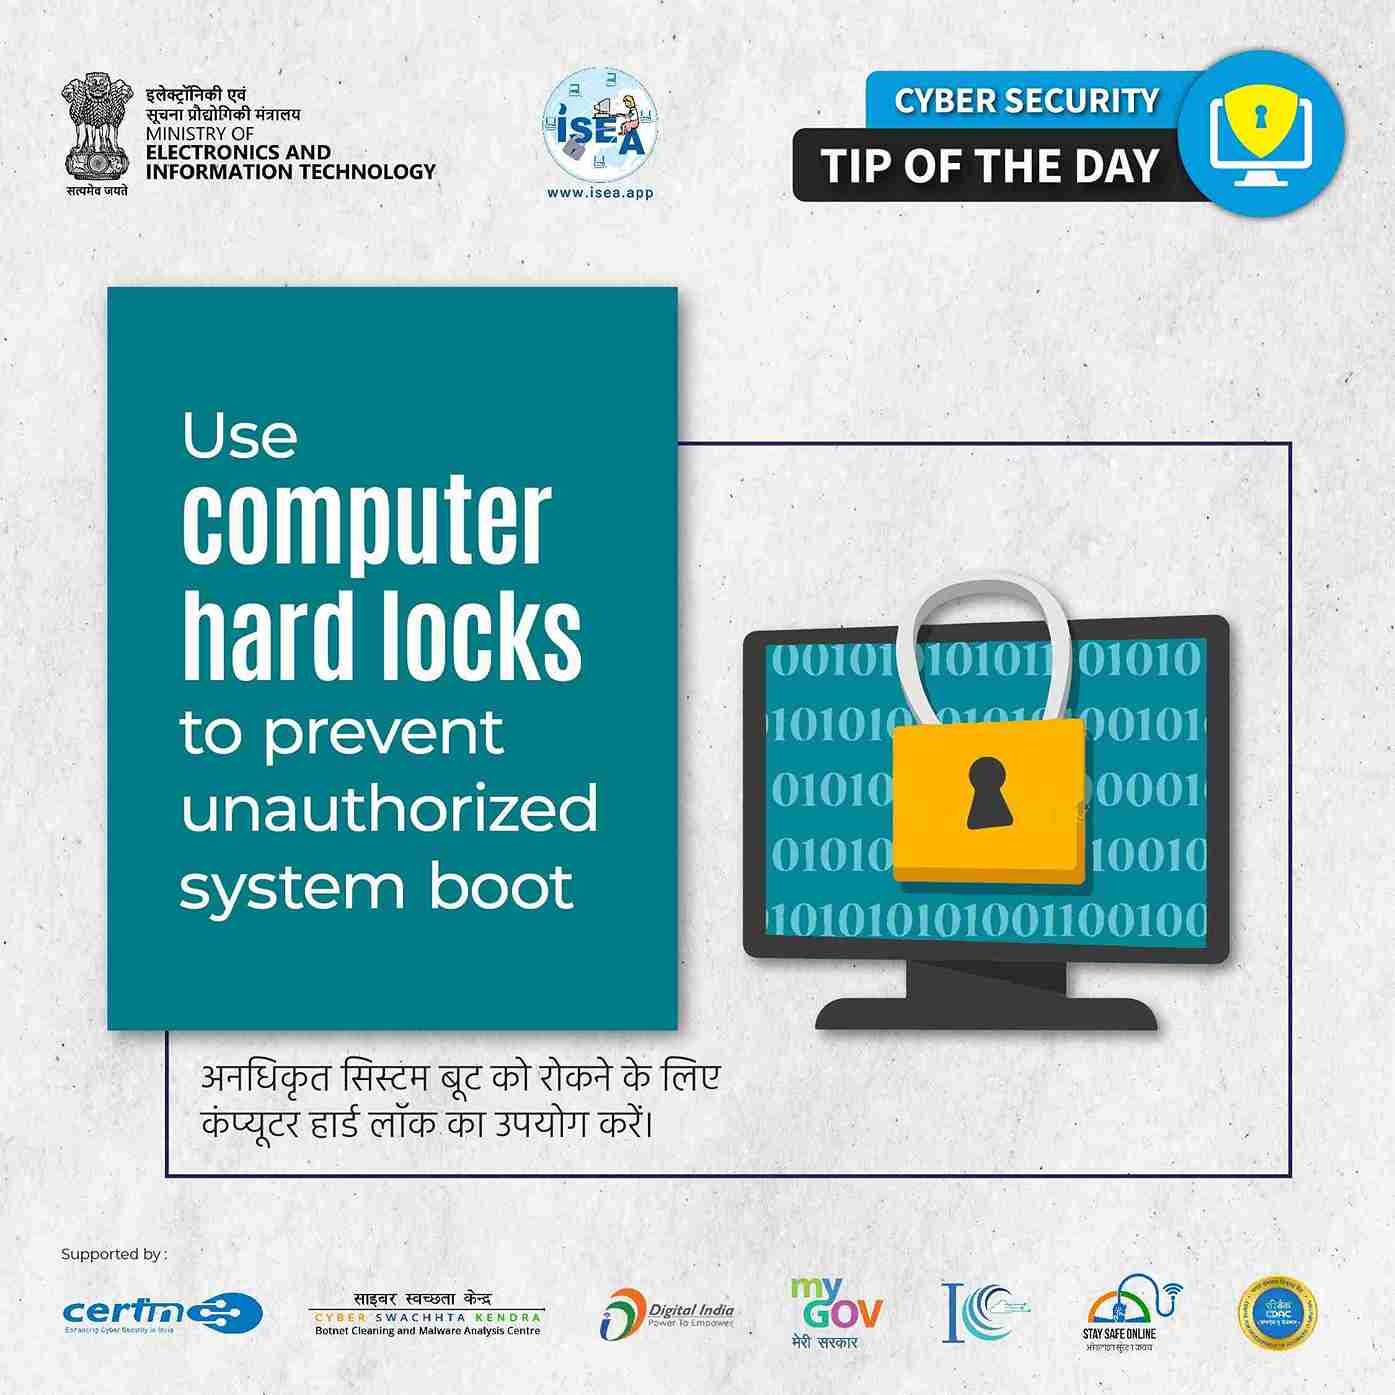 Cyber Security Tip of the Day 18